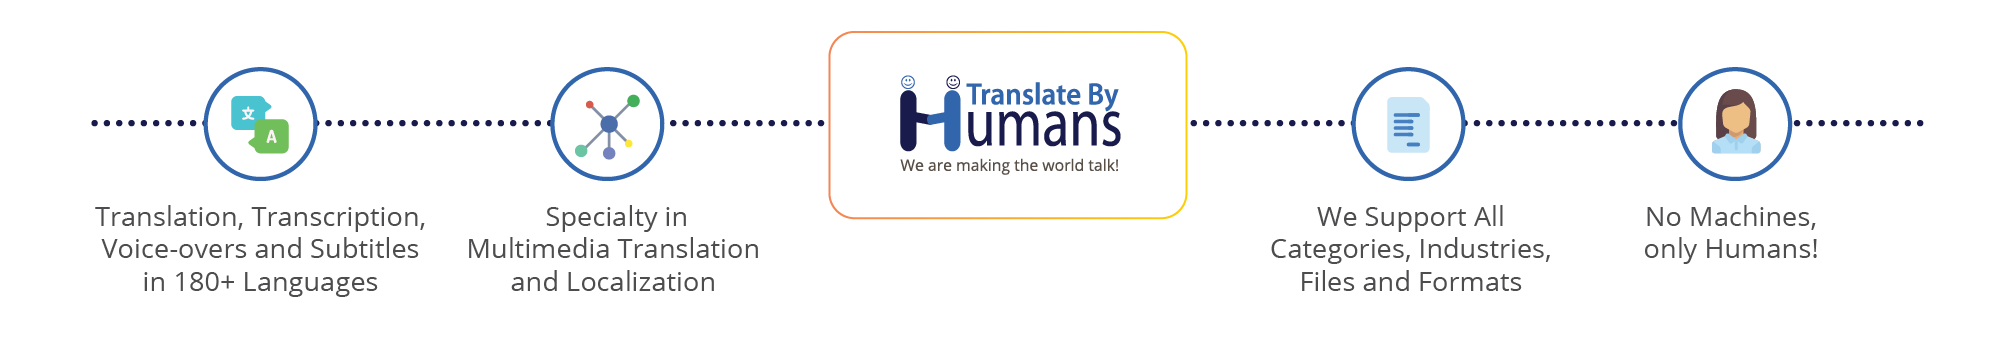 About Translate By Humans